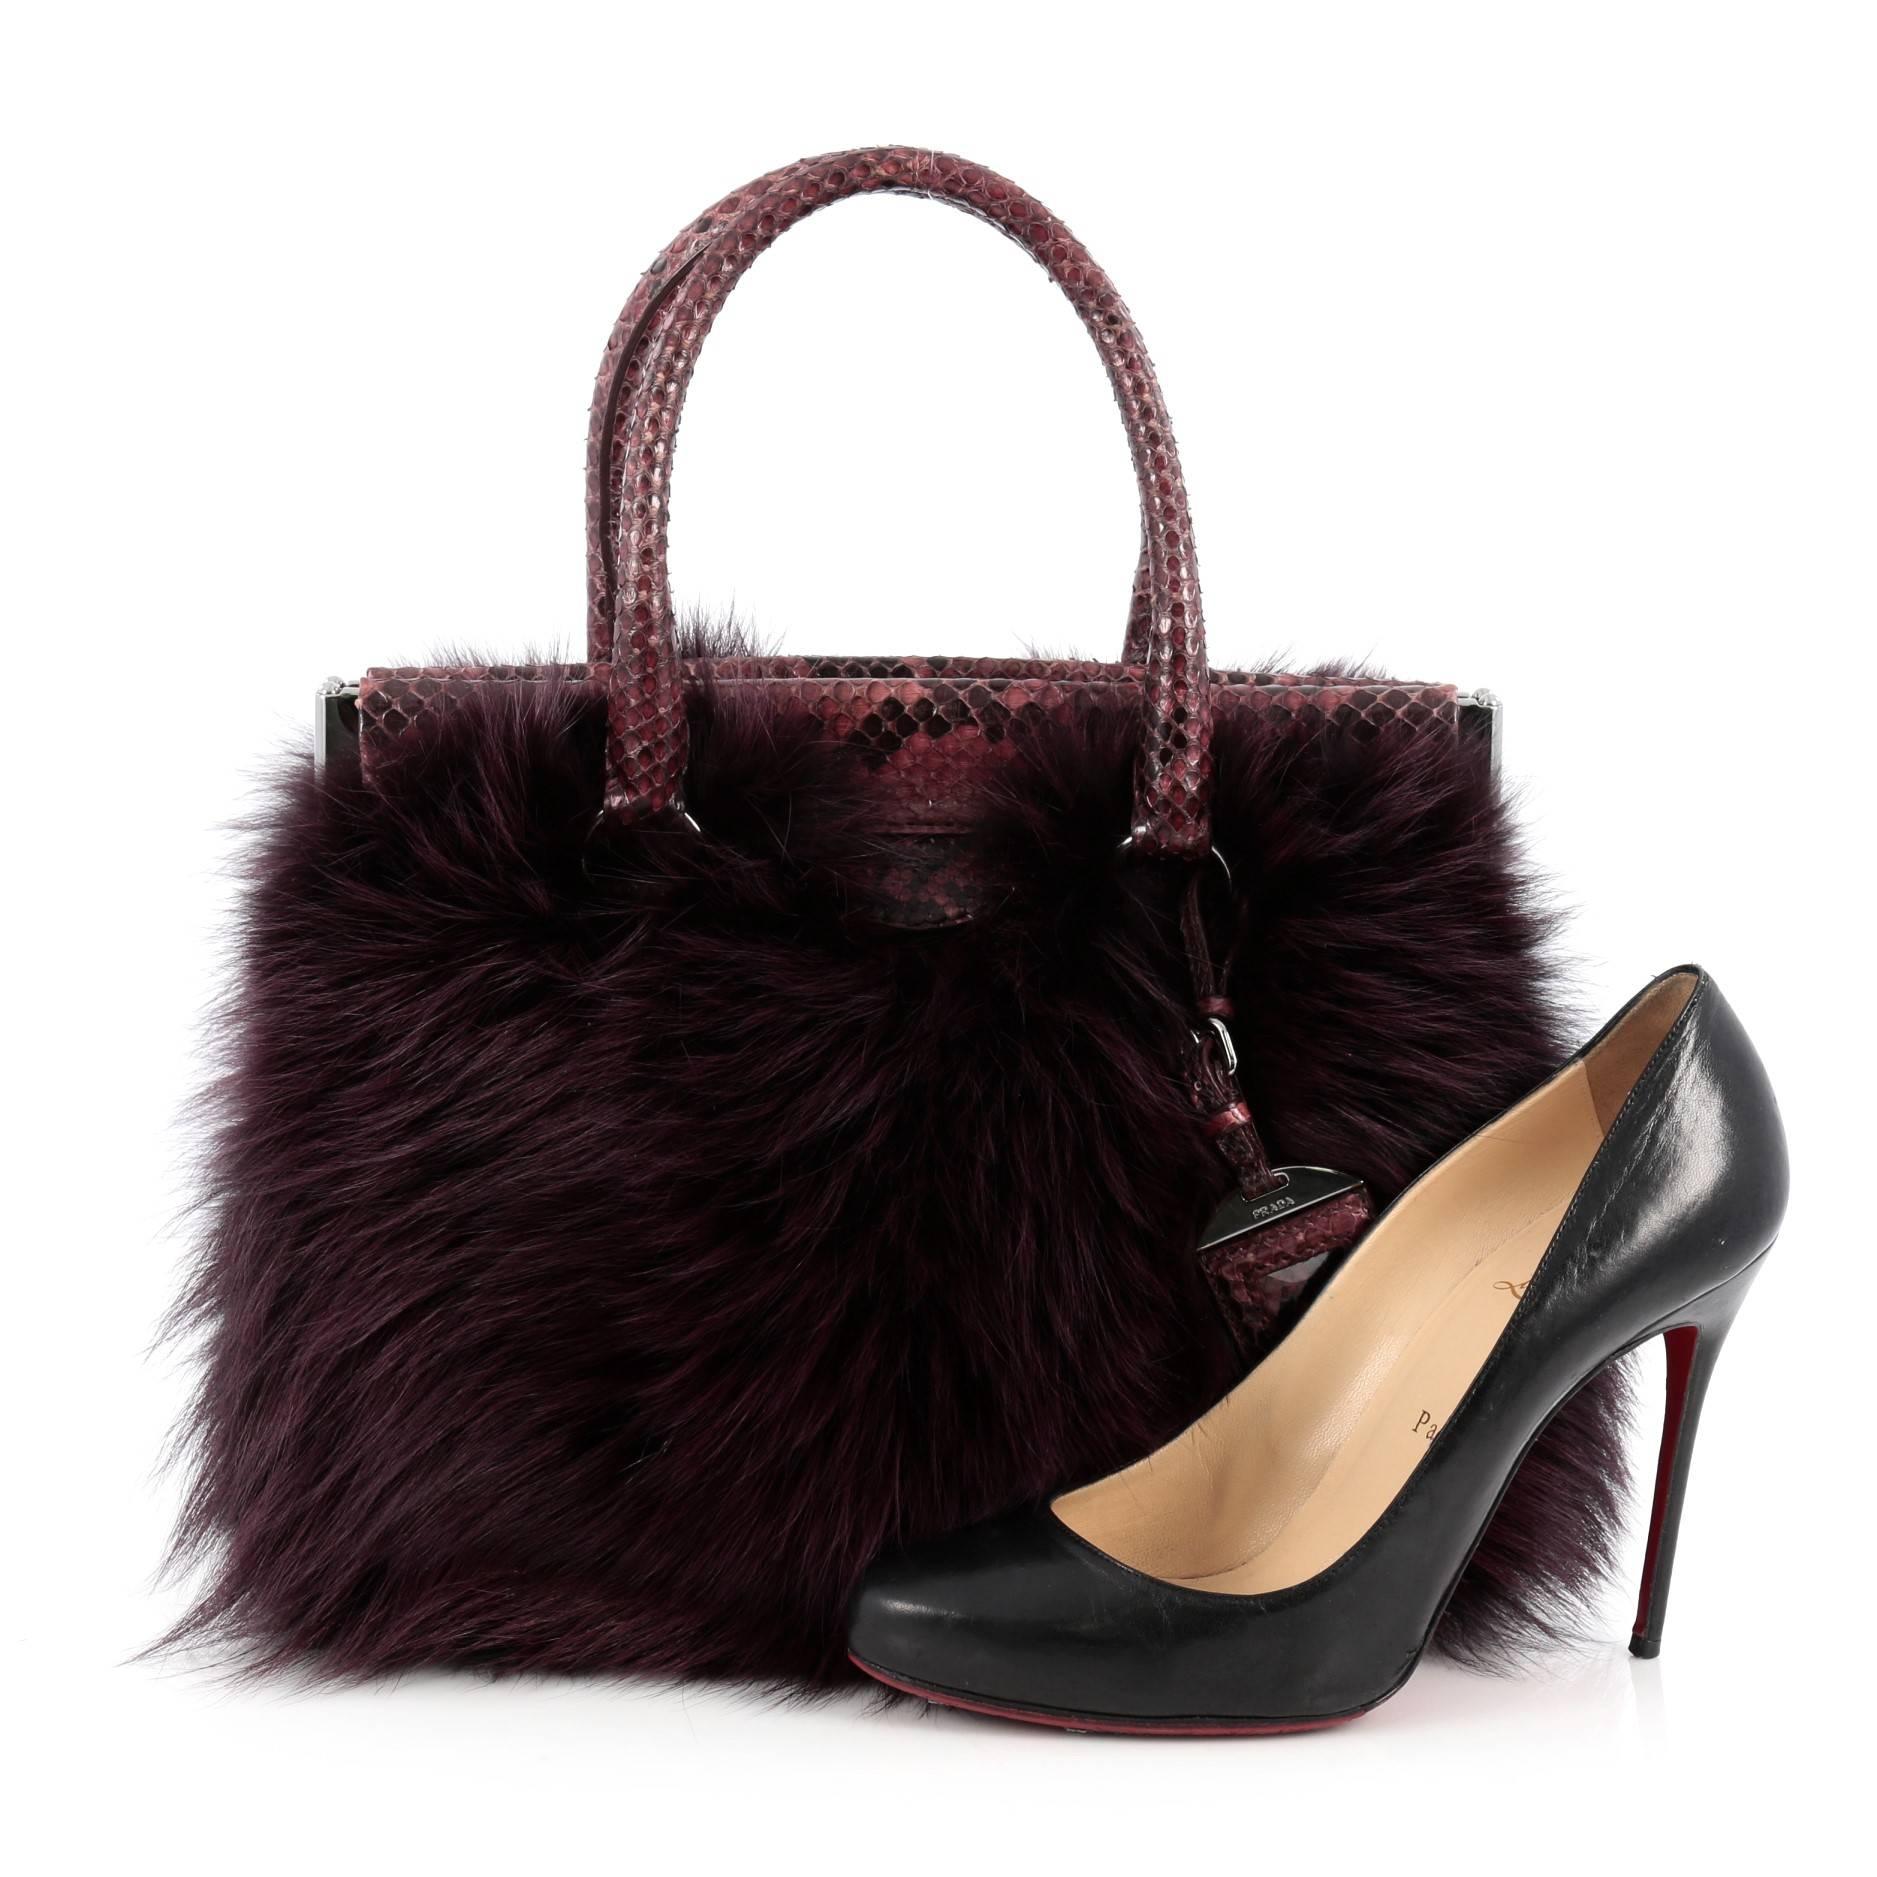 This authentic Prada Frame Satchel Fox Fur and Python Medium is a vintage-inspired, sophisticated carry-all bag with a modern twist. Crafted from genuine purple fox fur and python skin, this luxurious, exotic bag features dual-rolled python skin